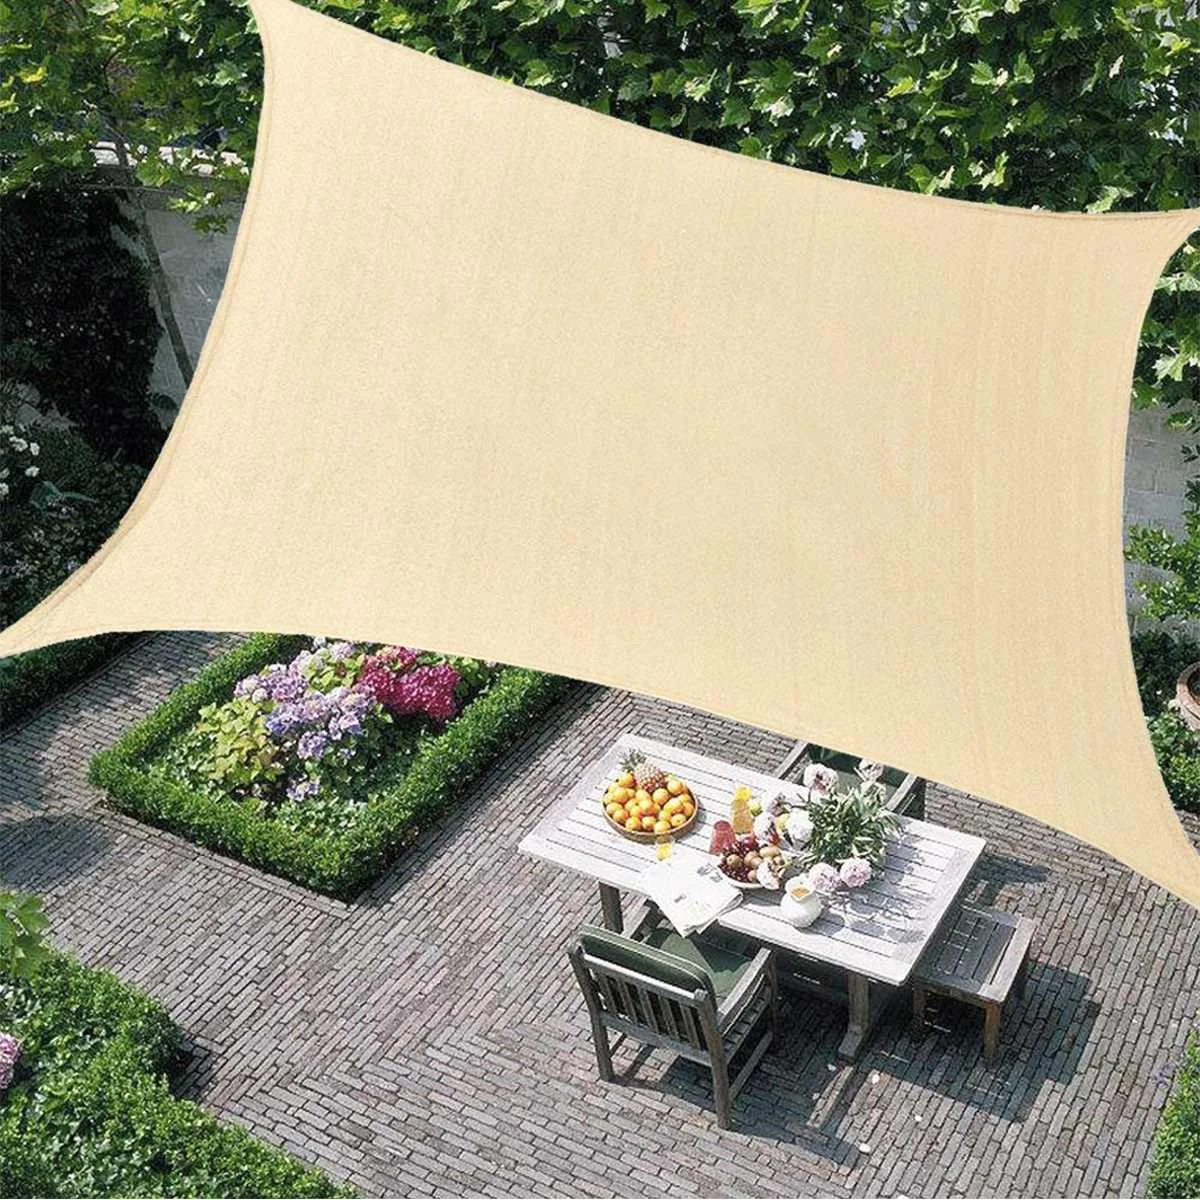 

Light Beige Rectangle Square Extra Heavy Duty Shade Sail Cloth Hanger2.5x2.5 3x3 4x4 5x5 2x3 2x4 2x5 2.5x3 3x4 3x5 3x62x2 3.